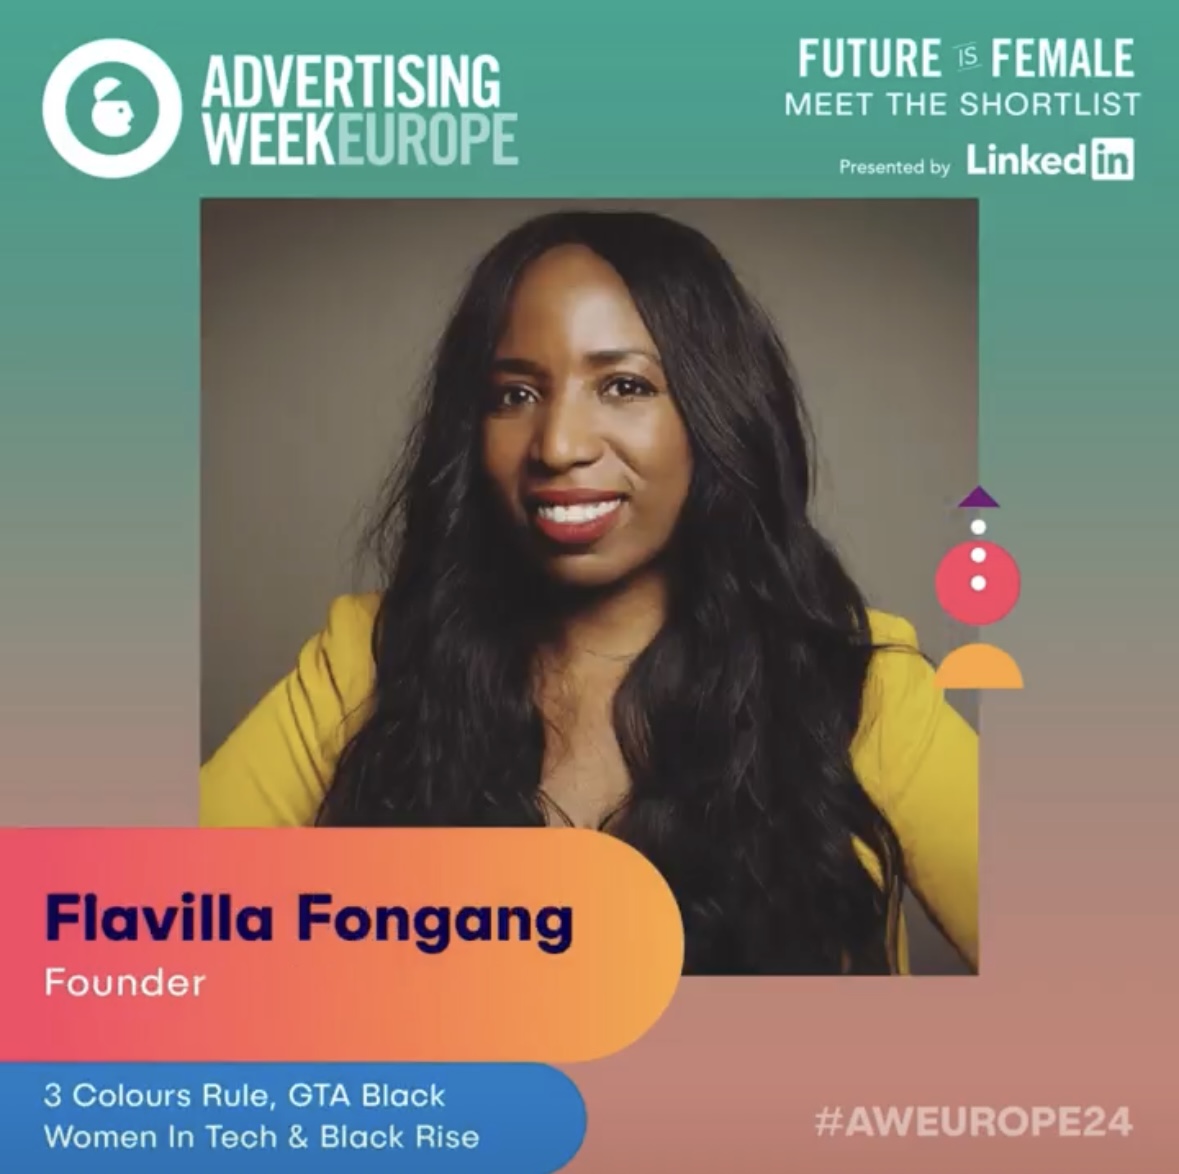 Like Kendrick Lamar, I always have something coming. If you know you know. 😅 I'm delighted to be among the top 25 Females of @advertisingweek  The Future is Female. I'm grateful to be among so many women. I continue to share my wins to inspire you to set no limits